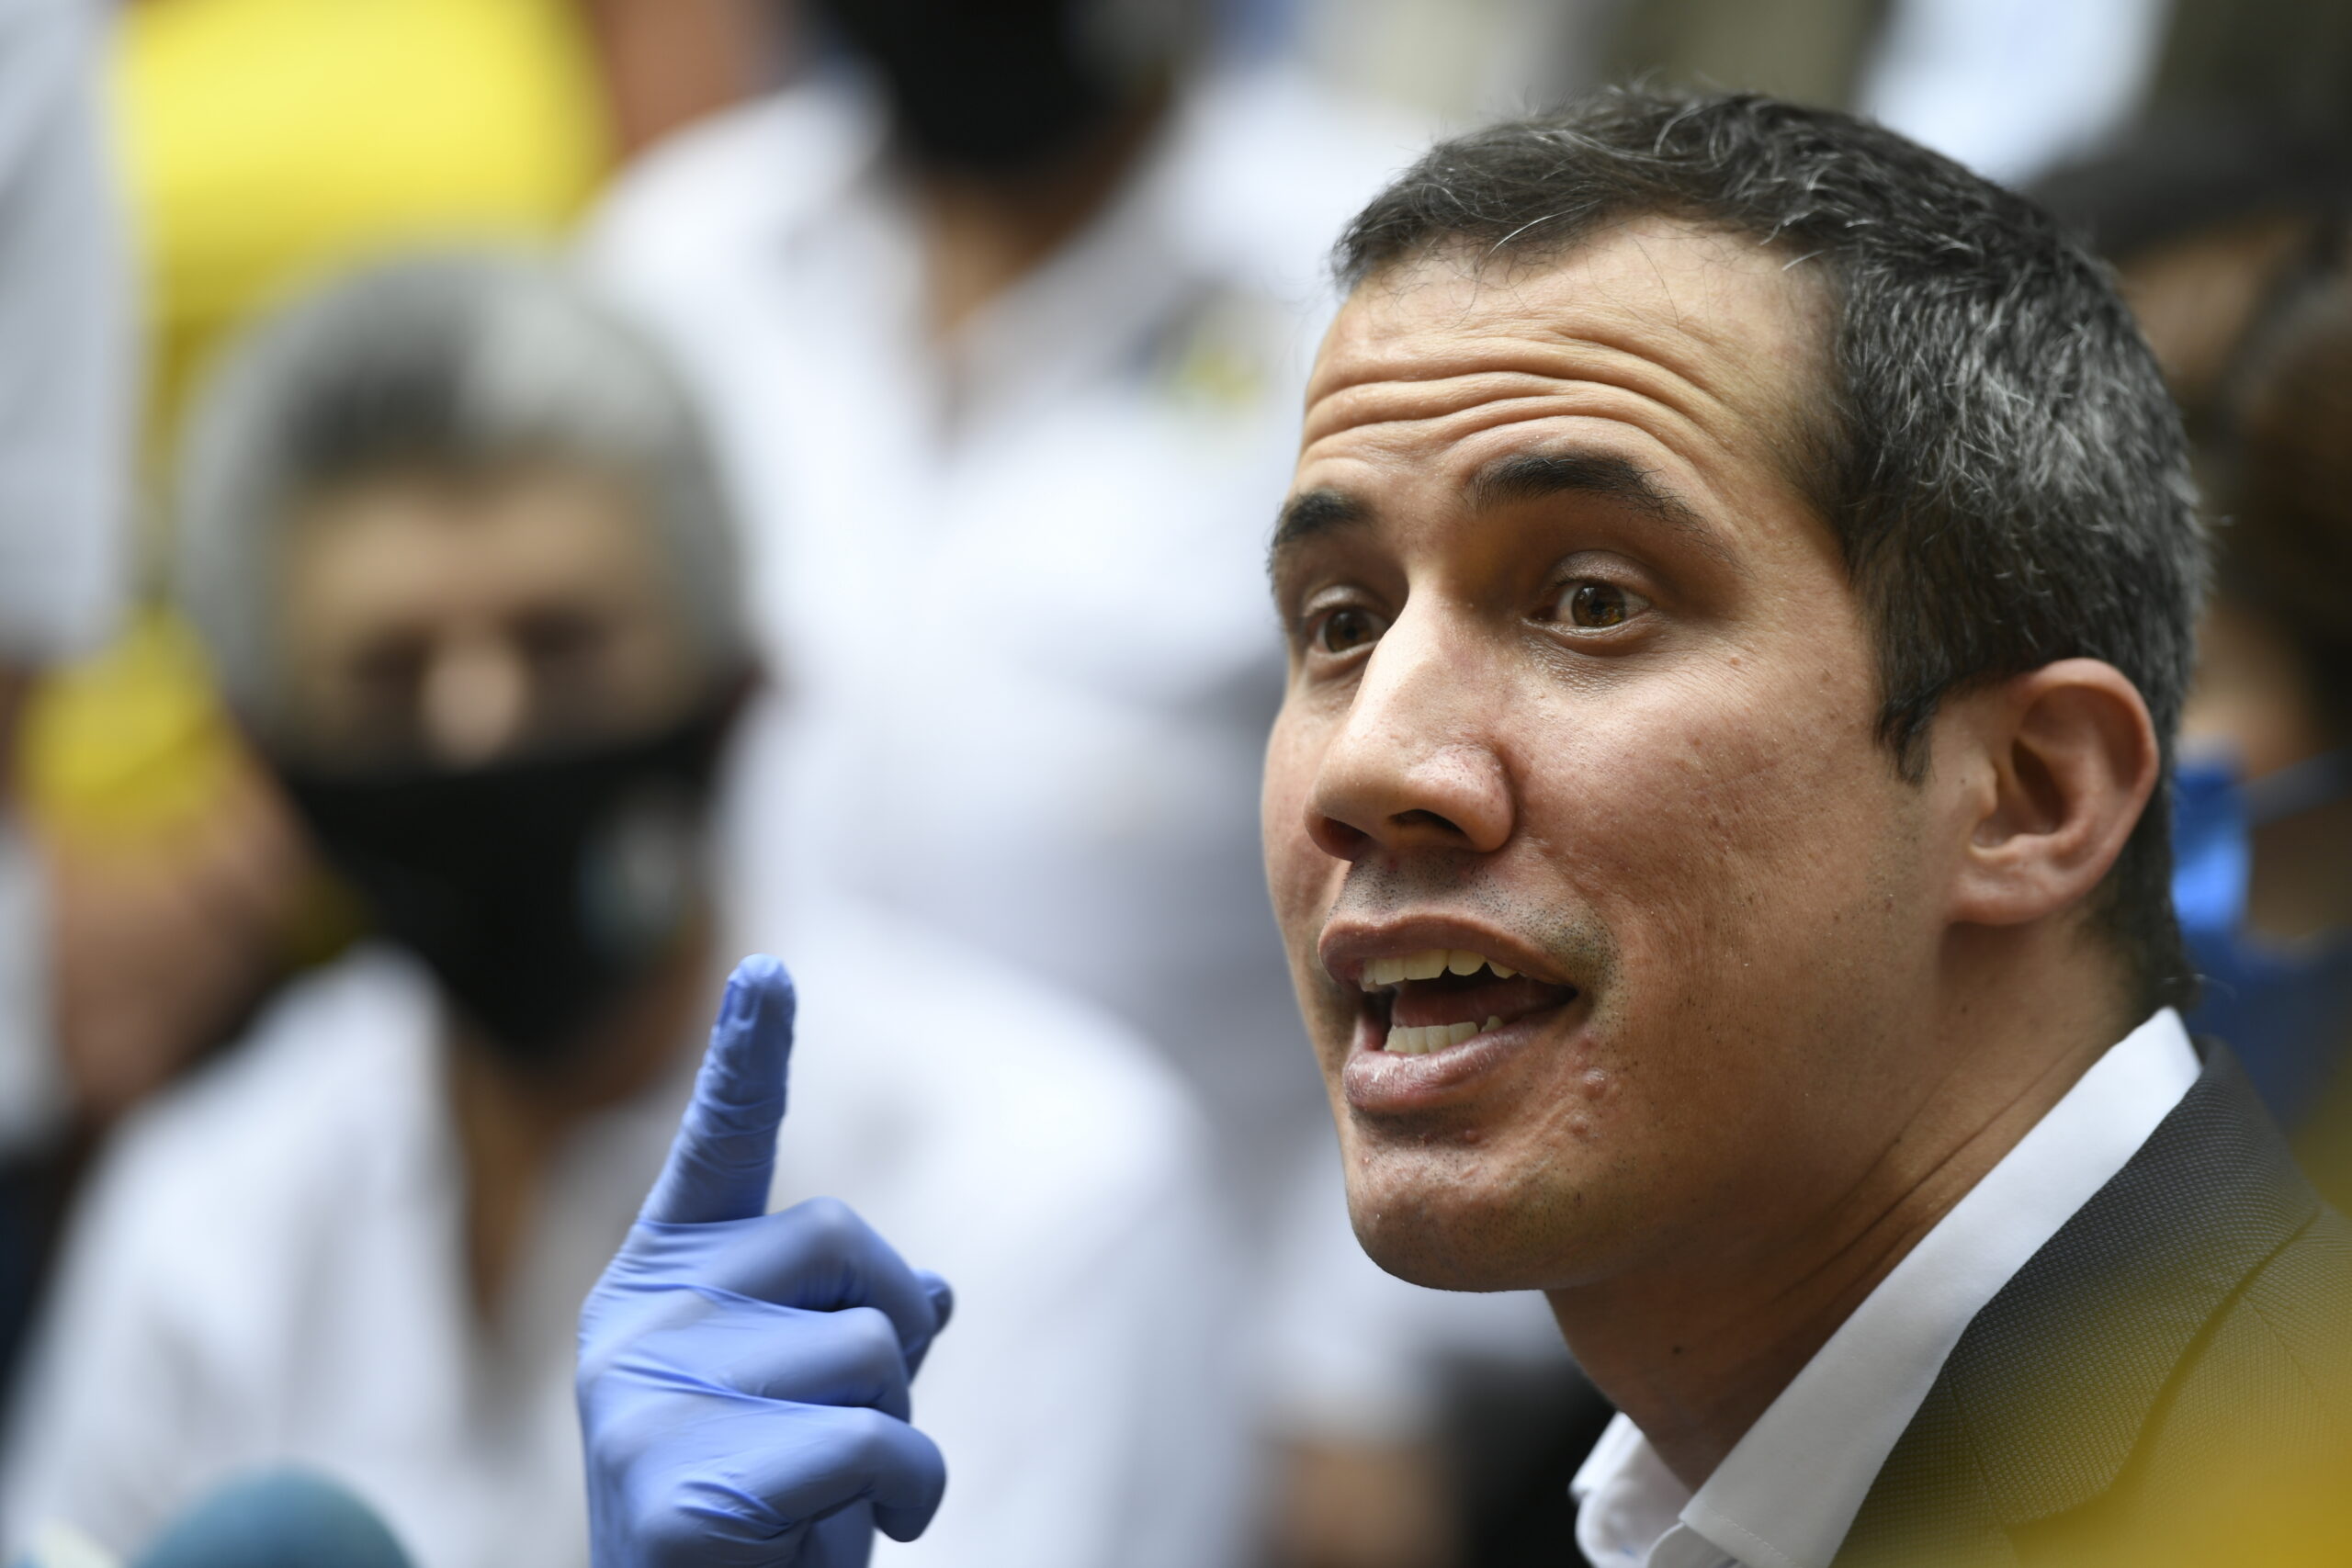 ‘Abstention is Not Enough:’ Venezuela’s Mainstream Opposition Weighs Next Steps<span class="wtr-time-wrap after-title"><span class="wtr-time-number">4</span> min read</span>